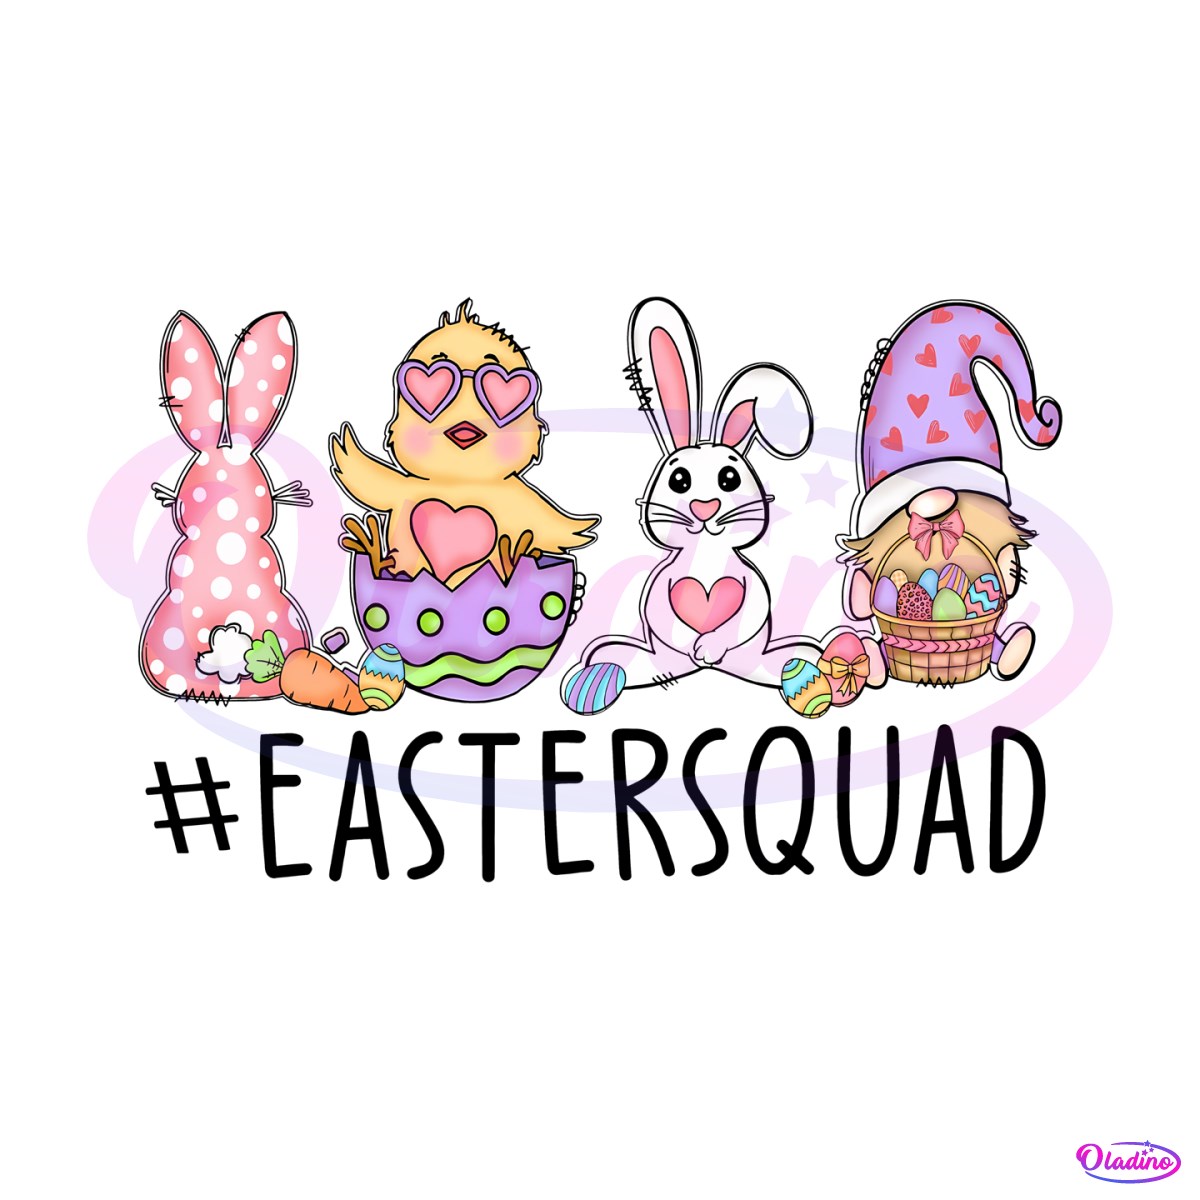 easter-squad-bunny-chicks-eggs-png